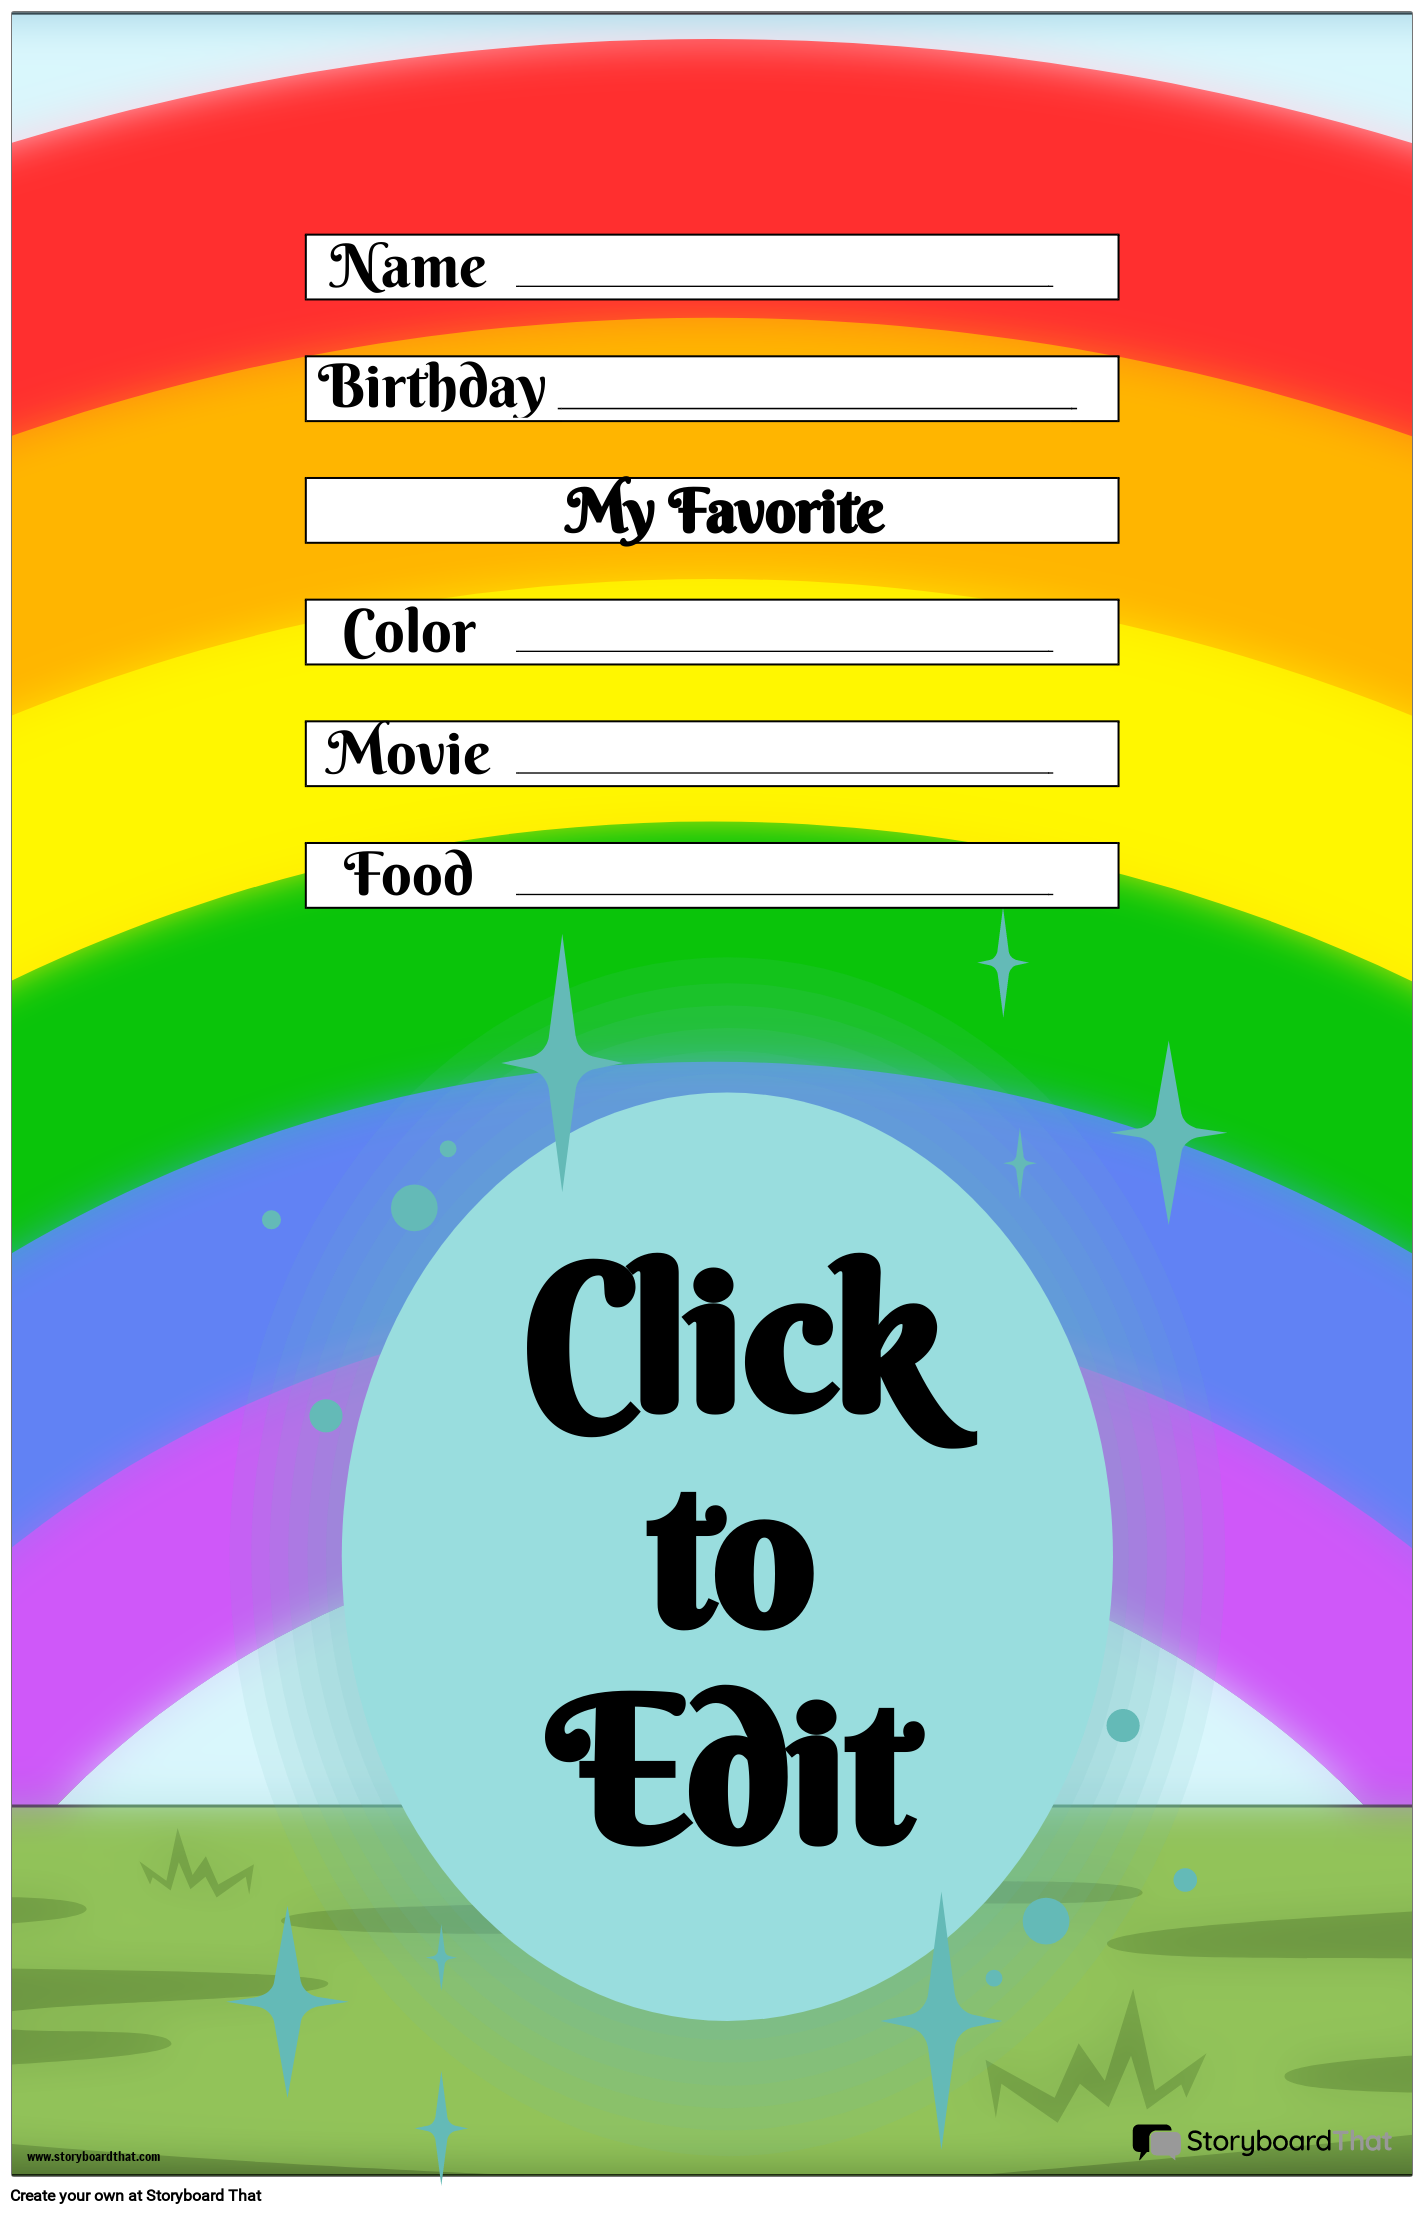 Example of a Star of the Week with Rainbows